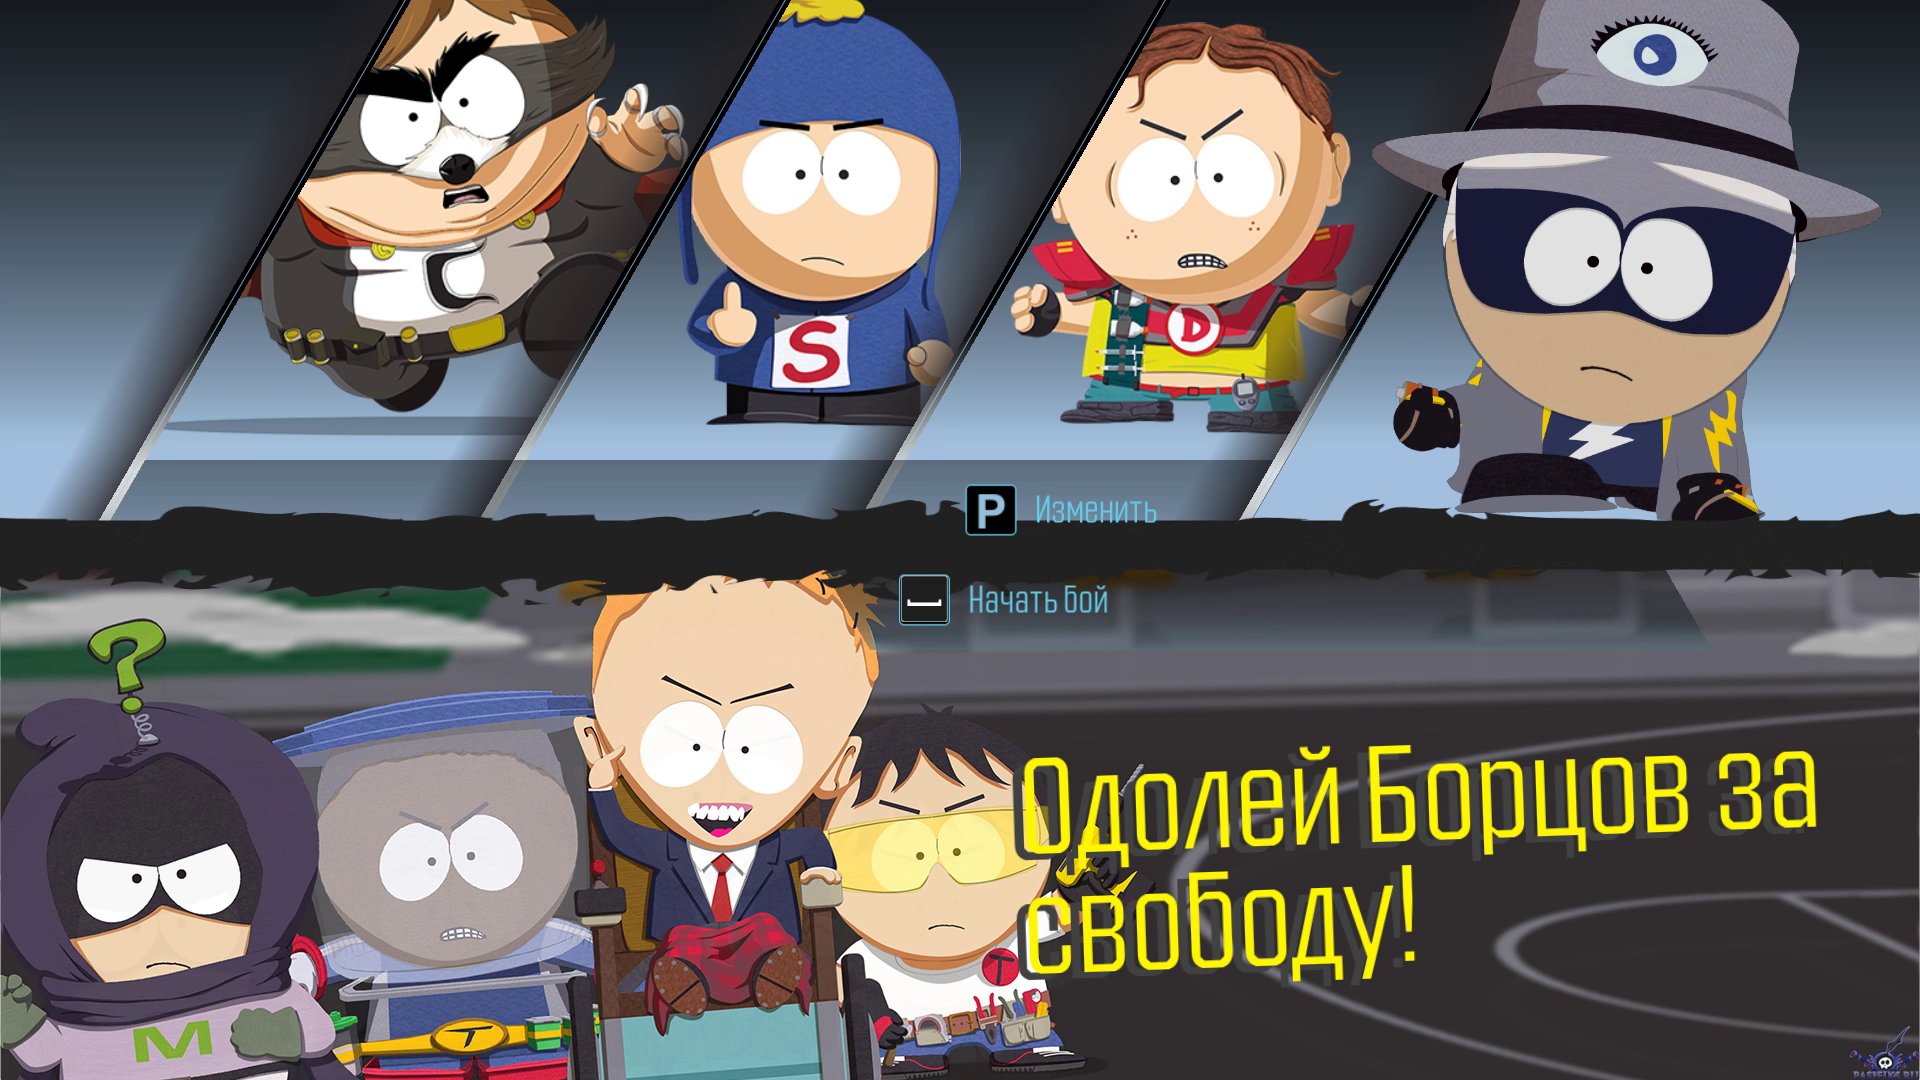 South park the fractured but whole купить ключ steam дешево фото 114